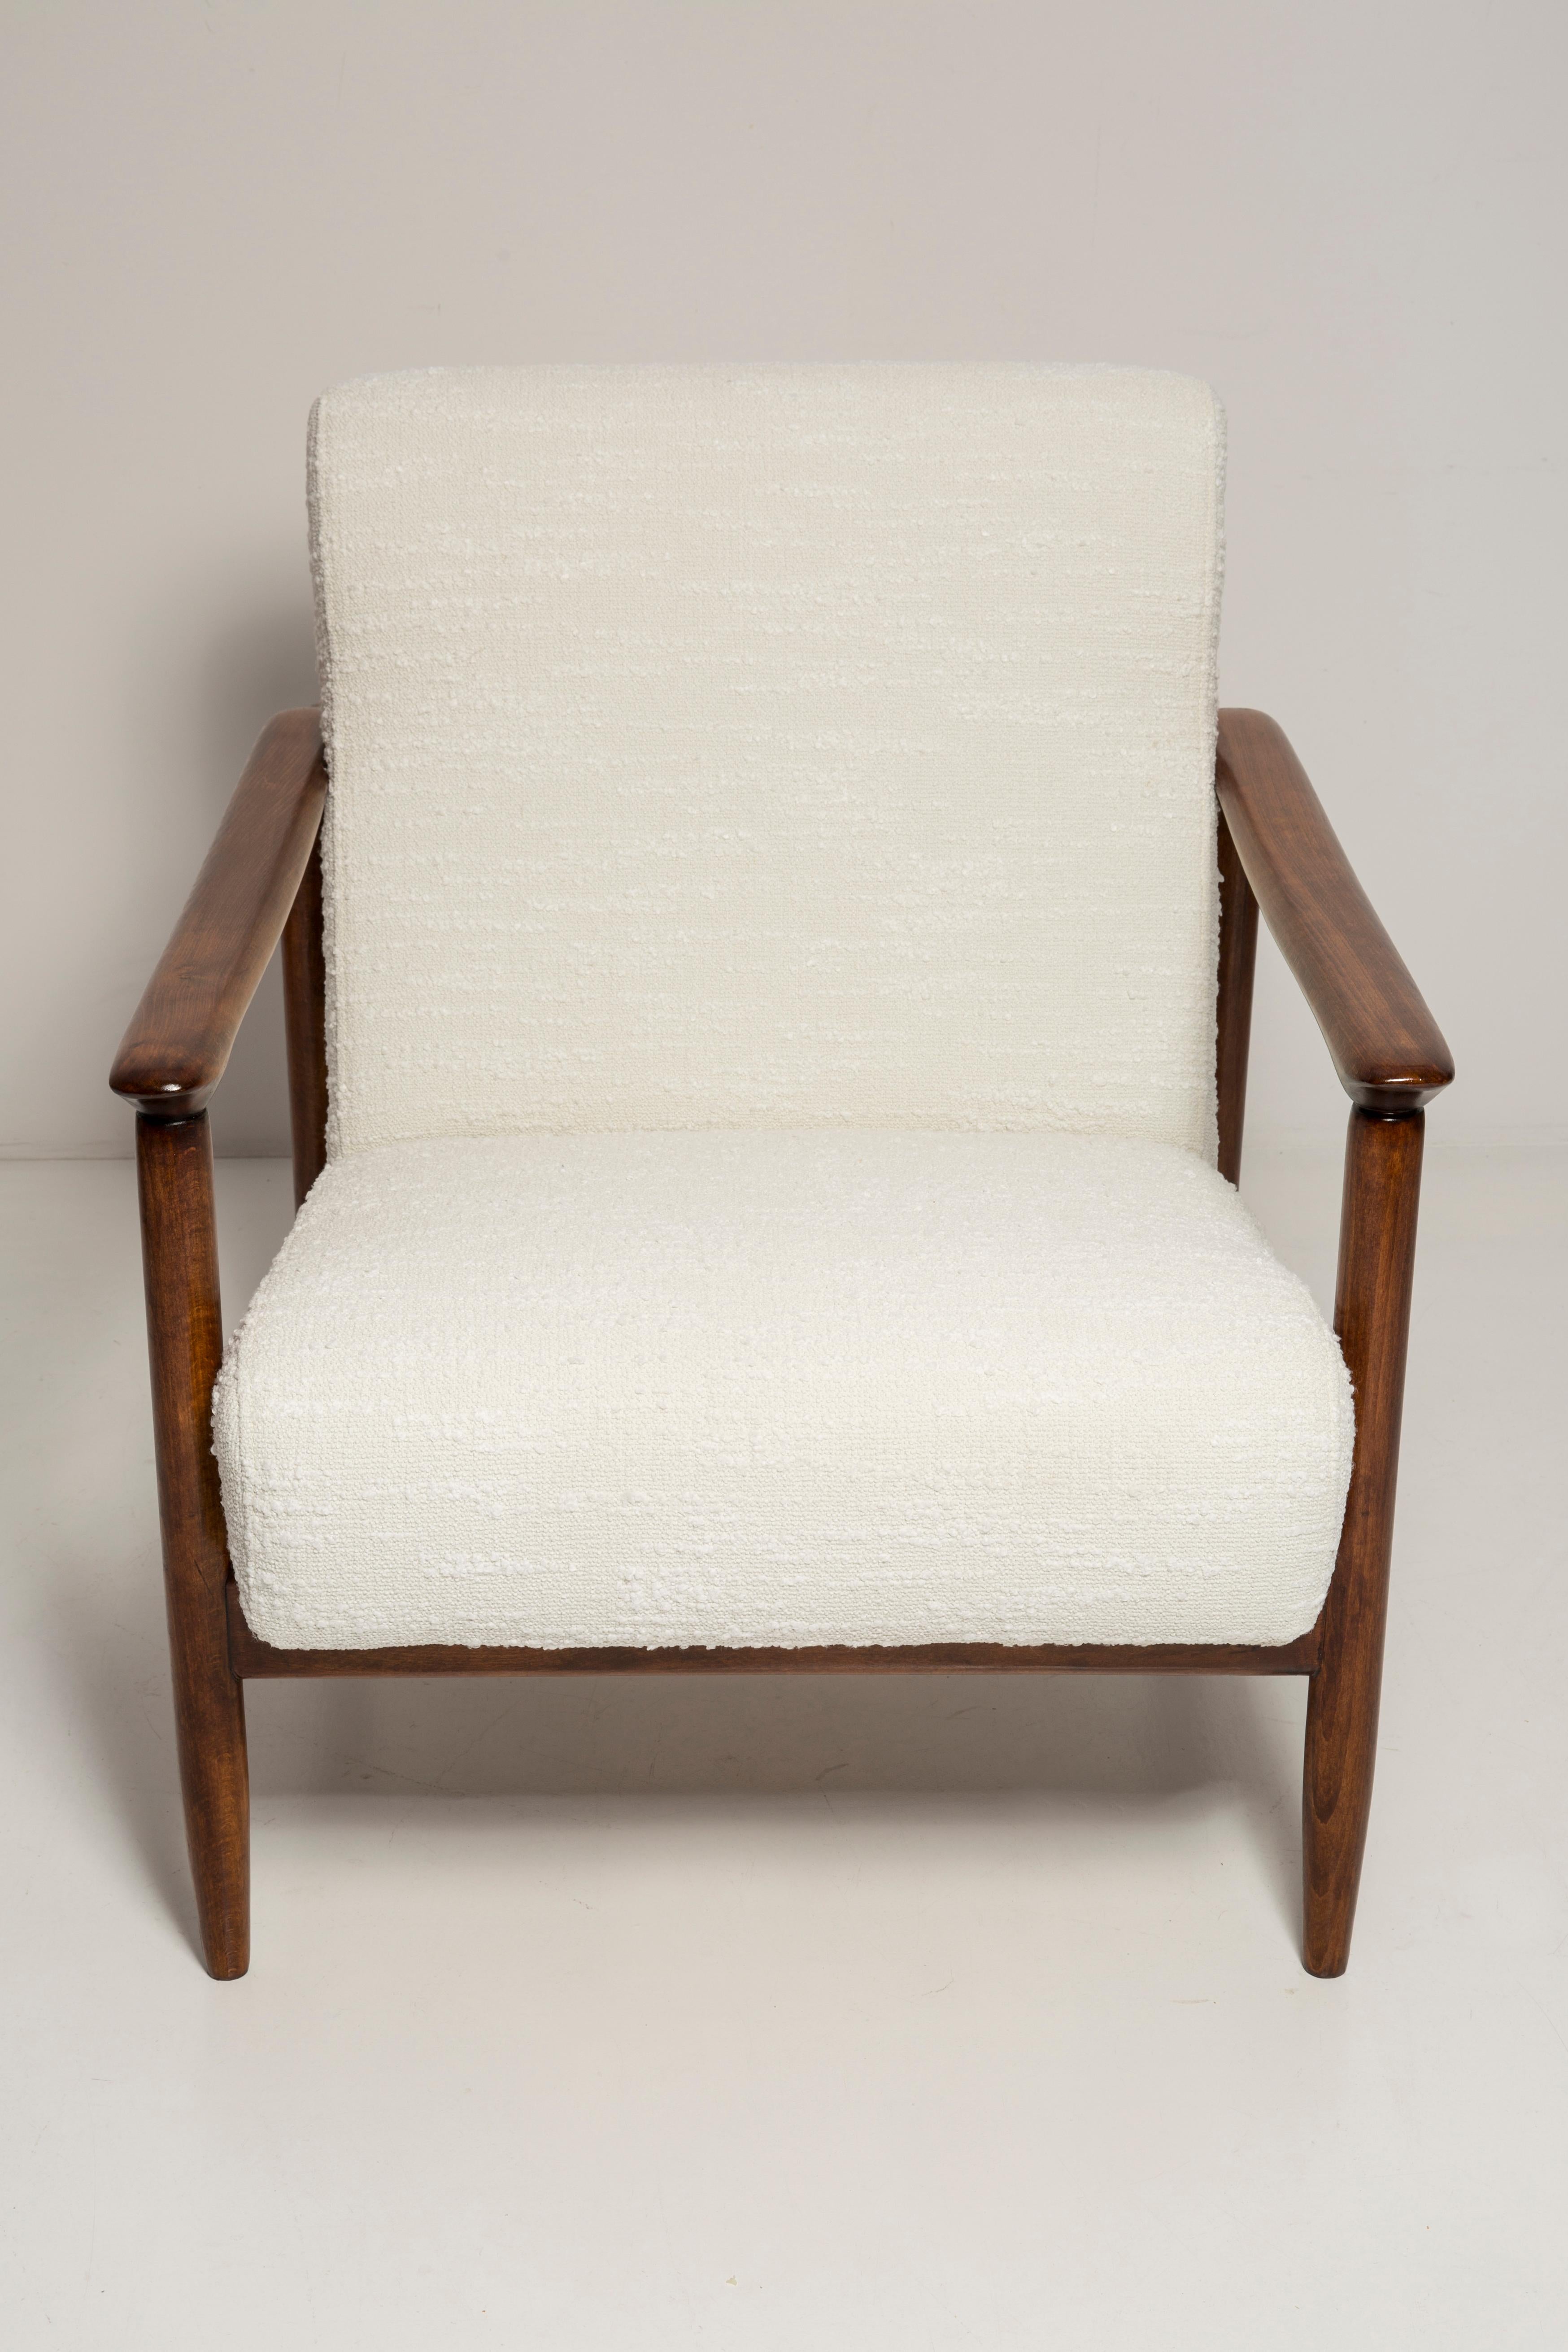 Pair of Mid Century White Boucle Armchairs, GFM 142, Edmund Homa, Europe, 1960s For Sale 1